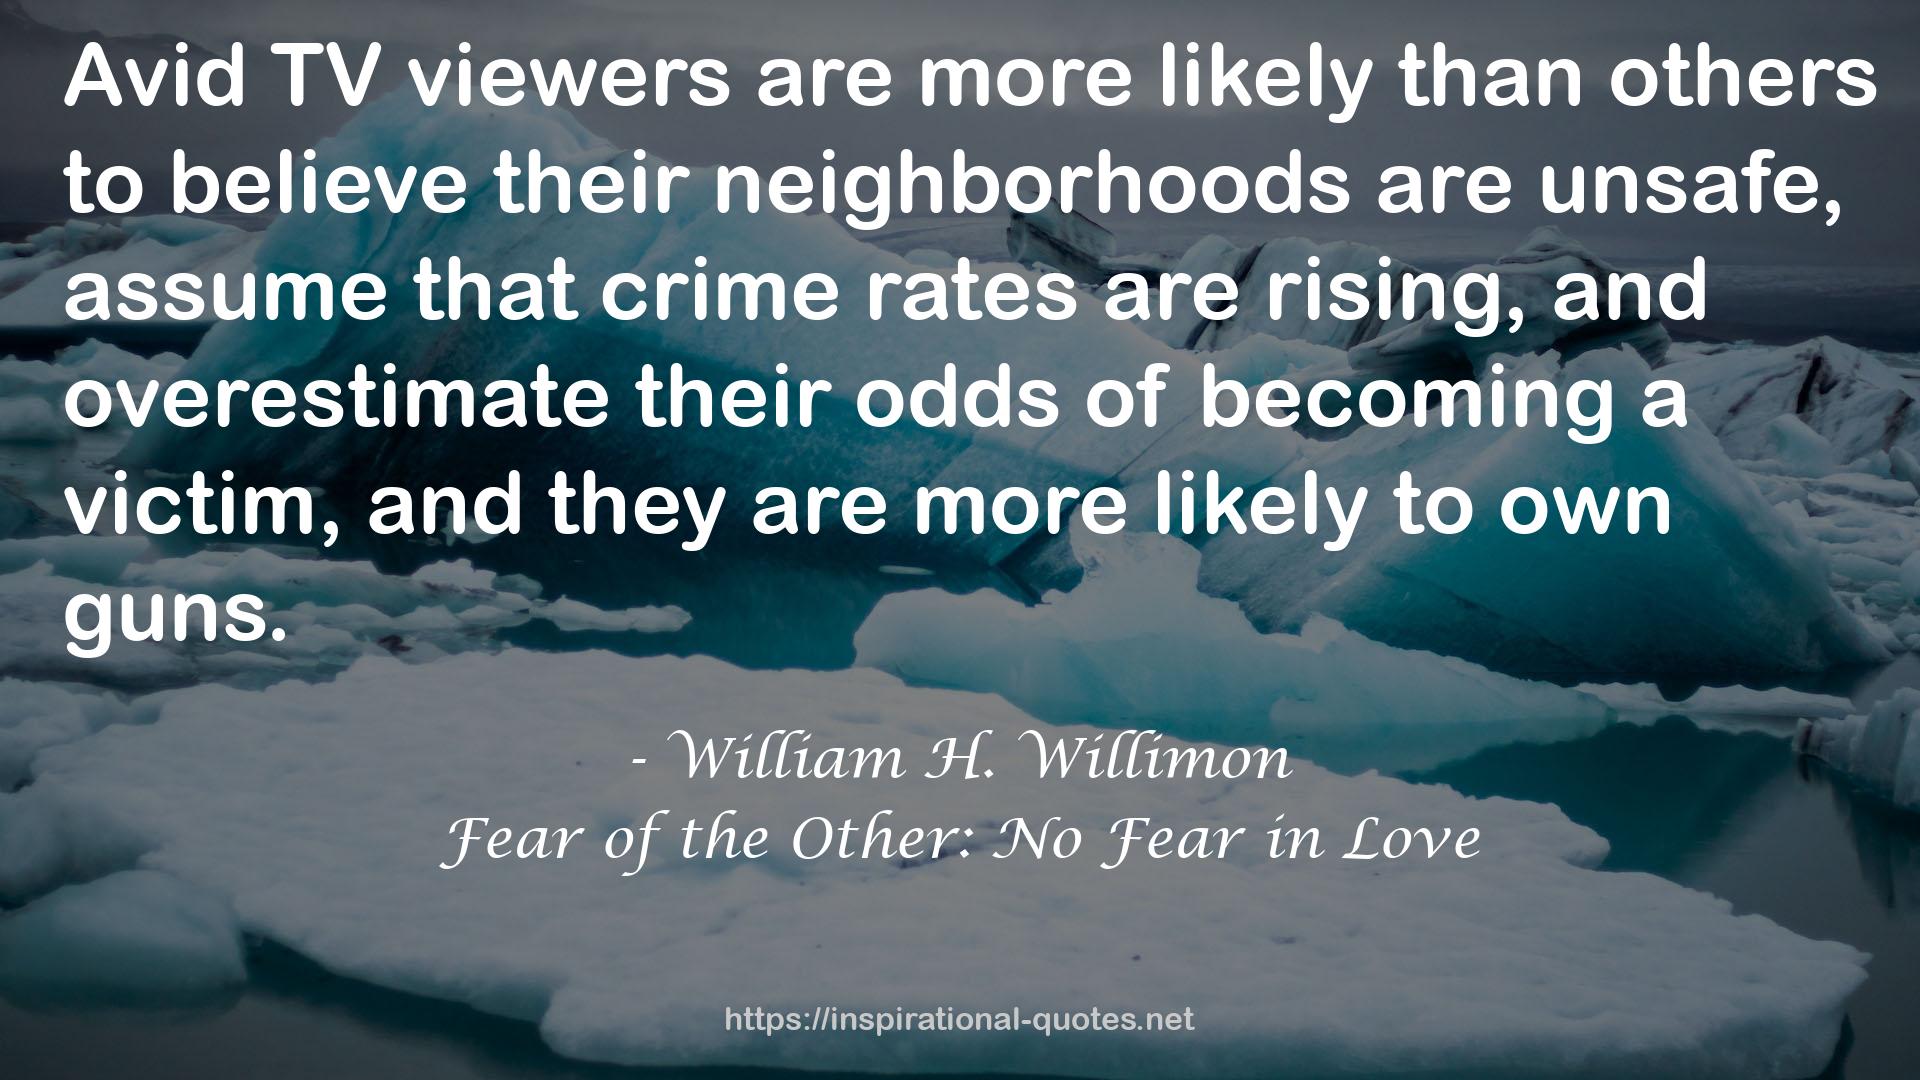 Fear of the Other: No Fear in Love QUOTES